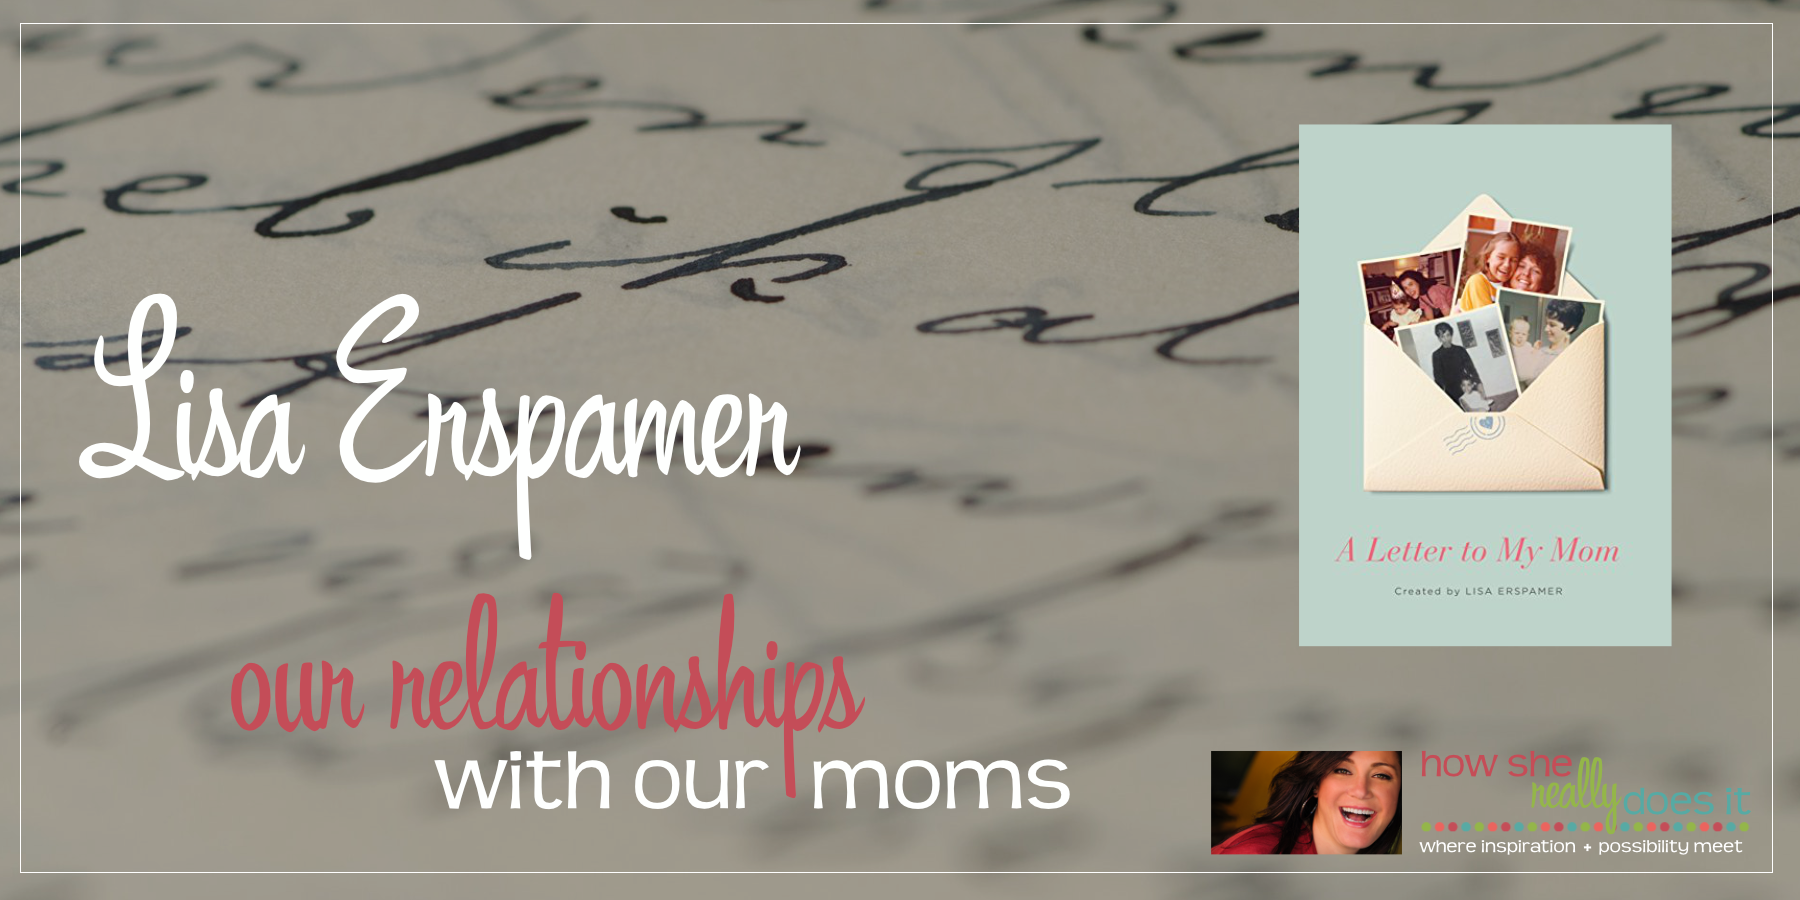 Lisa Erspamer: Our relationships with our moms